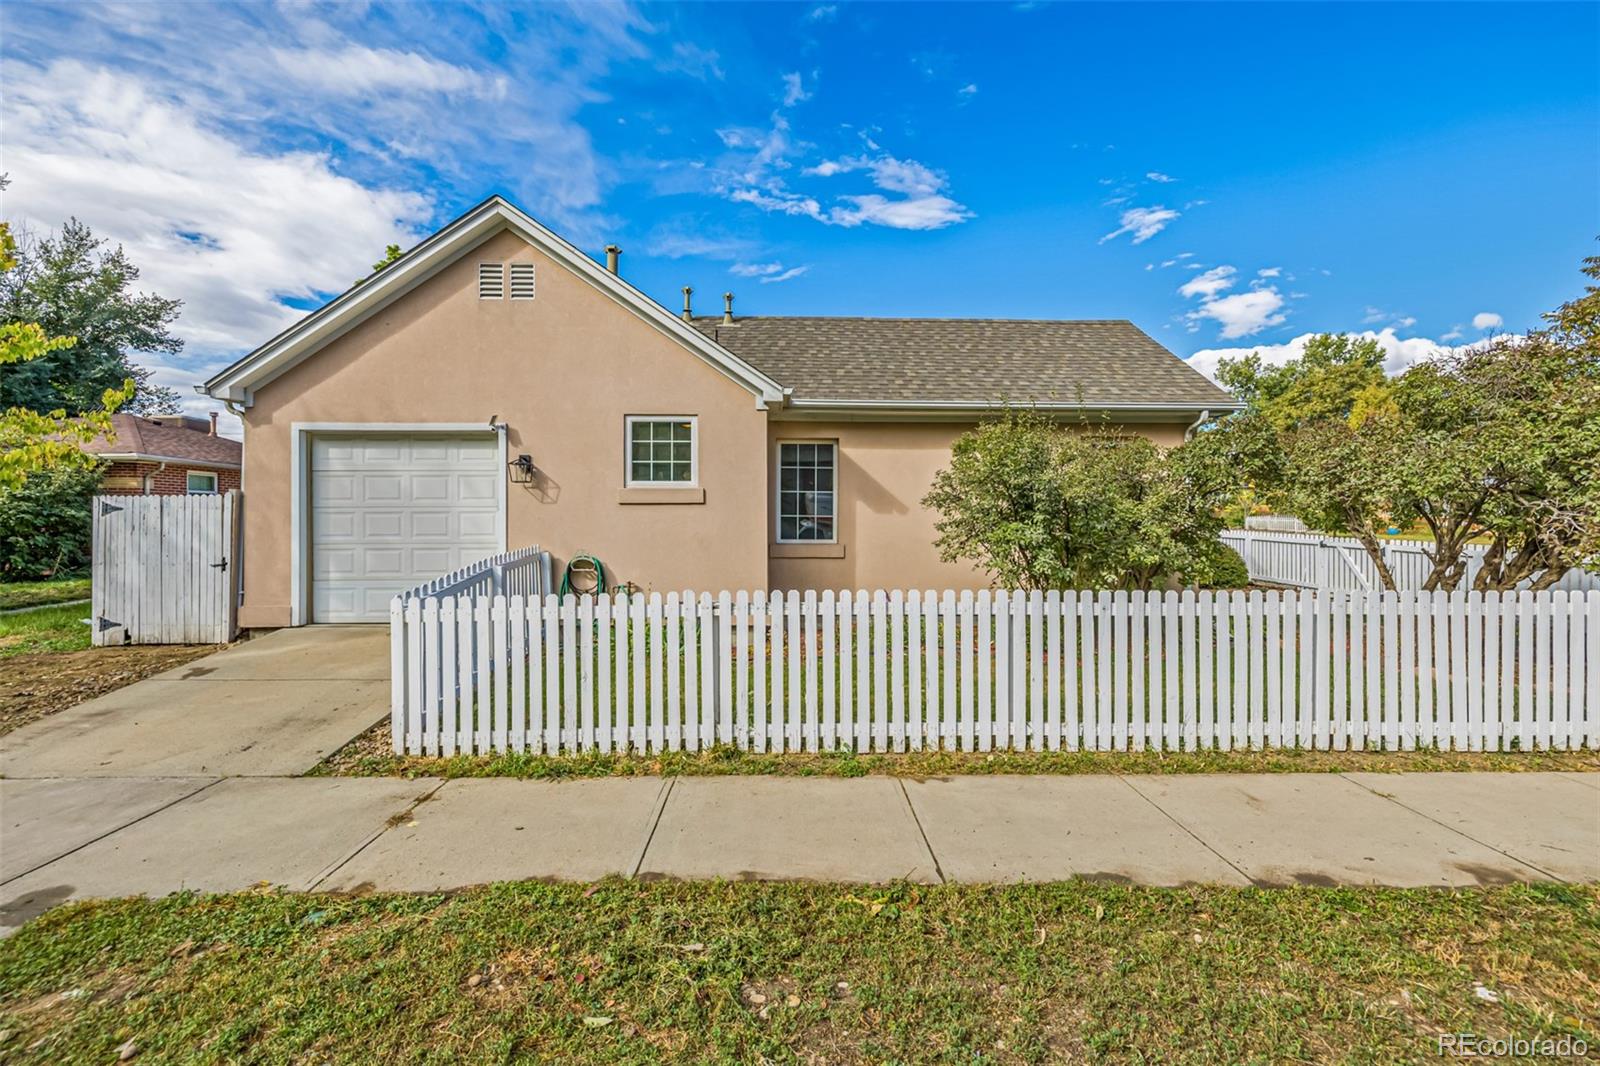 3200 w 26th avenue, denver sold home. Closed on 2024-02-06 for $651,000.